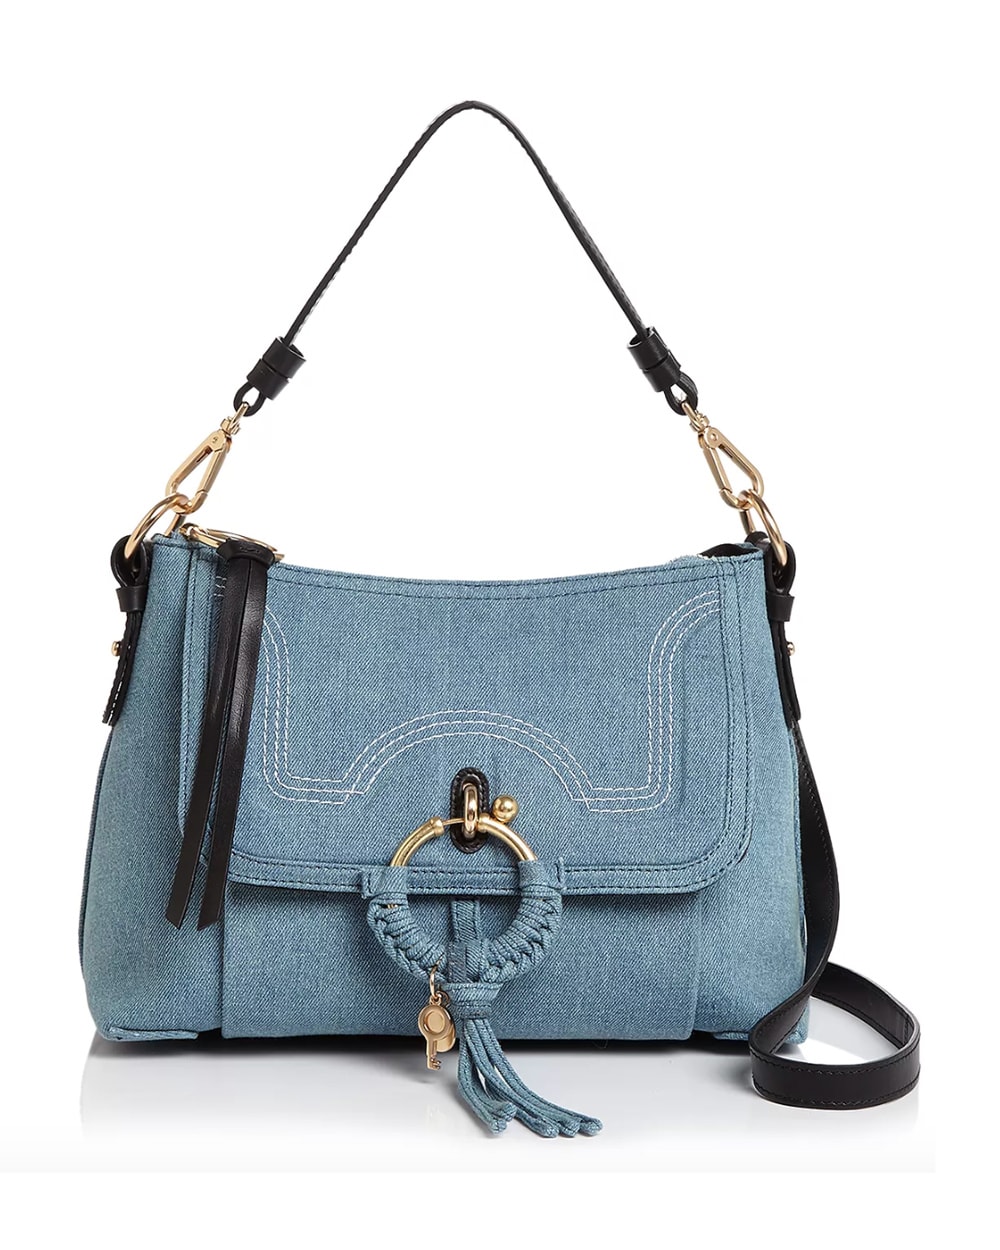 Quilted Denim Saddle Handbag 19 Designer Crossbody Tote With Flap, Gold &  Silver Tone Accents, Classic Gabrielle Purse From Erika008, $59.86 |  DHgate.Com